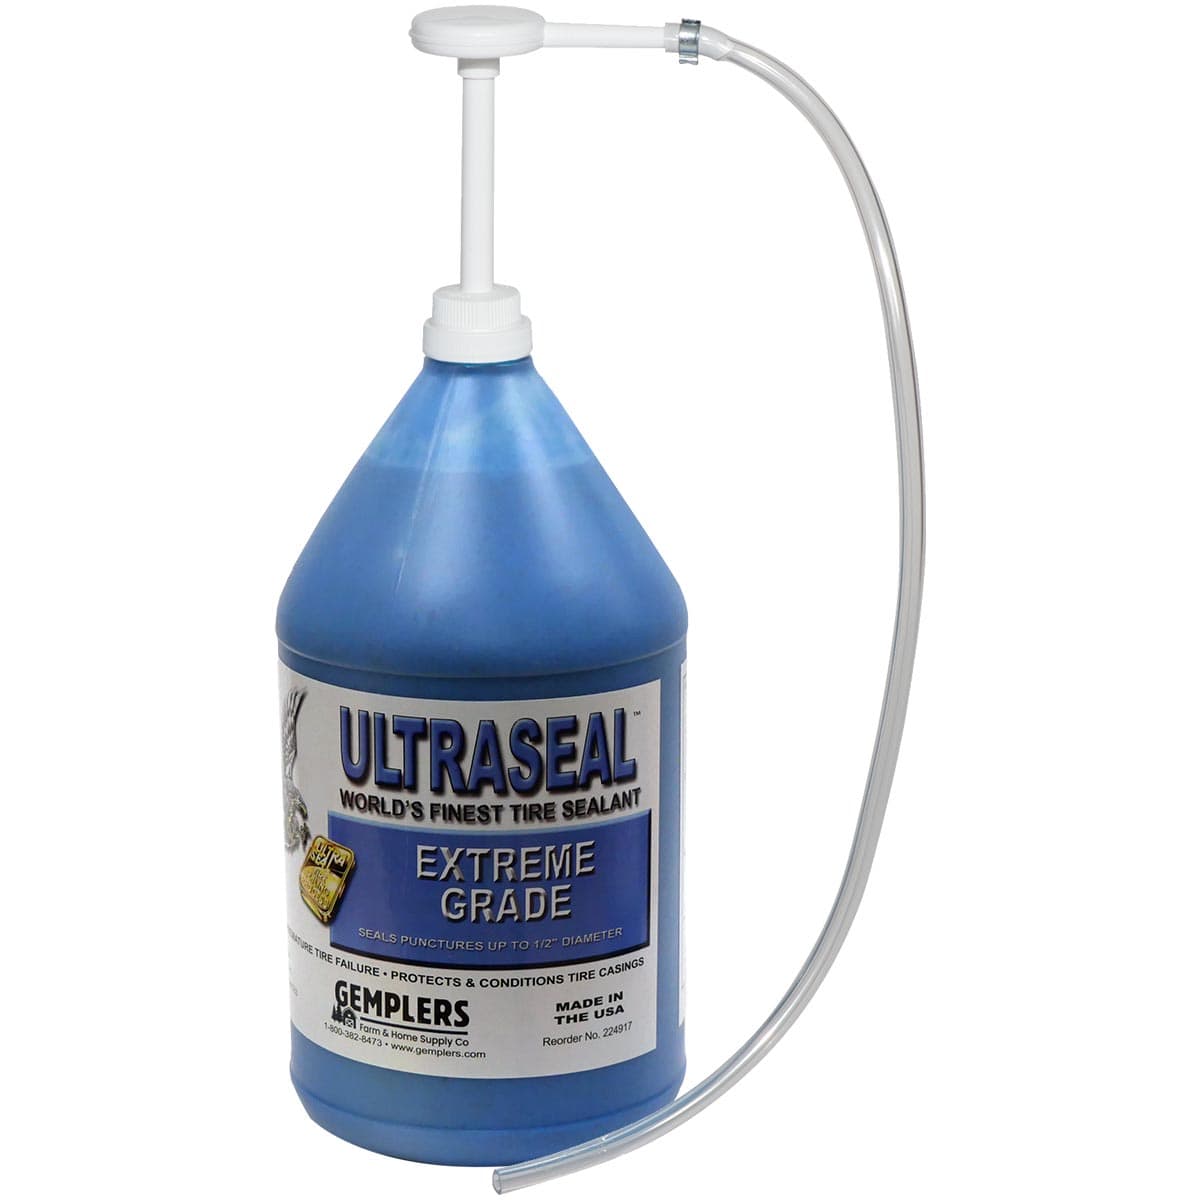 Ultraseal by Gemplers Extreme Grade Tire Sealant